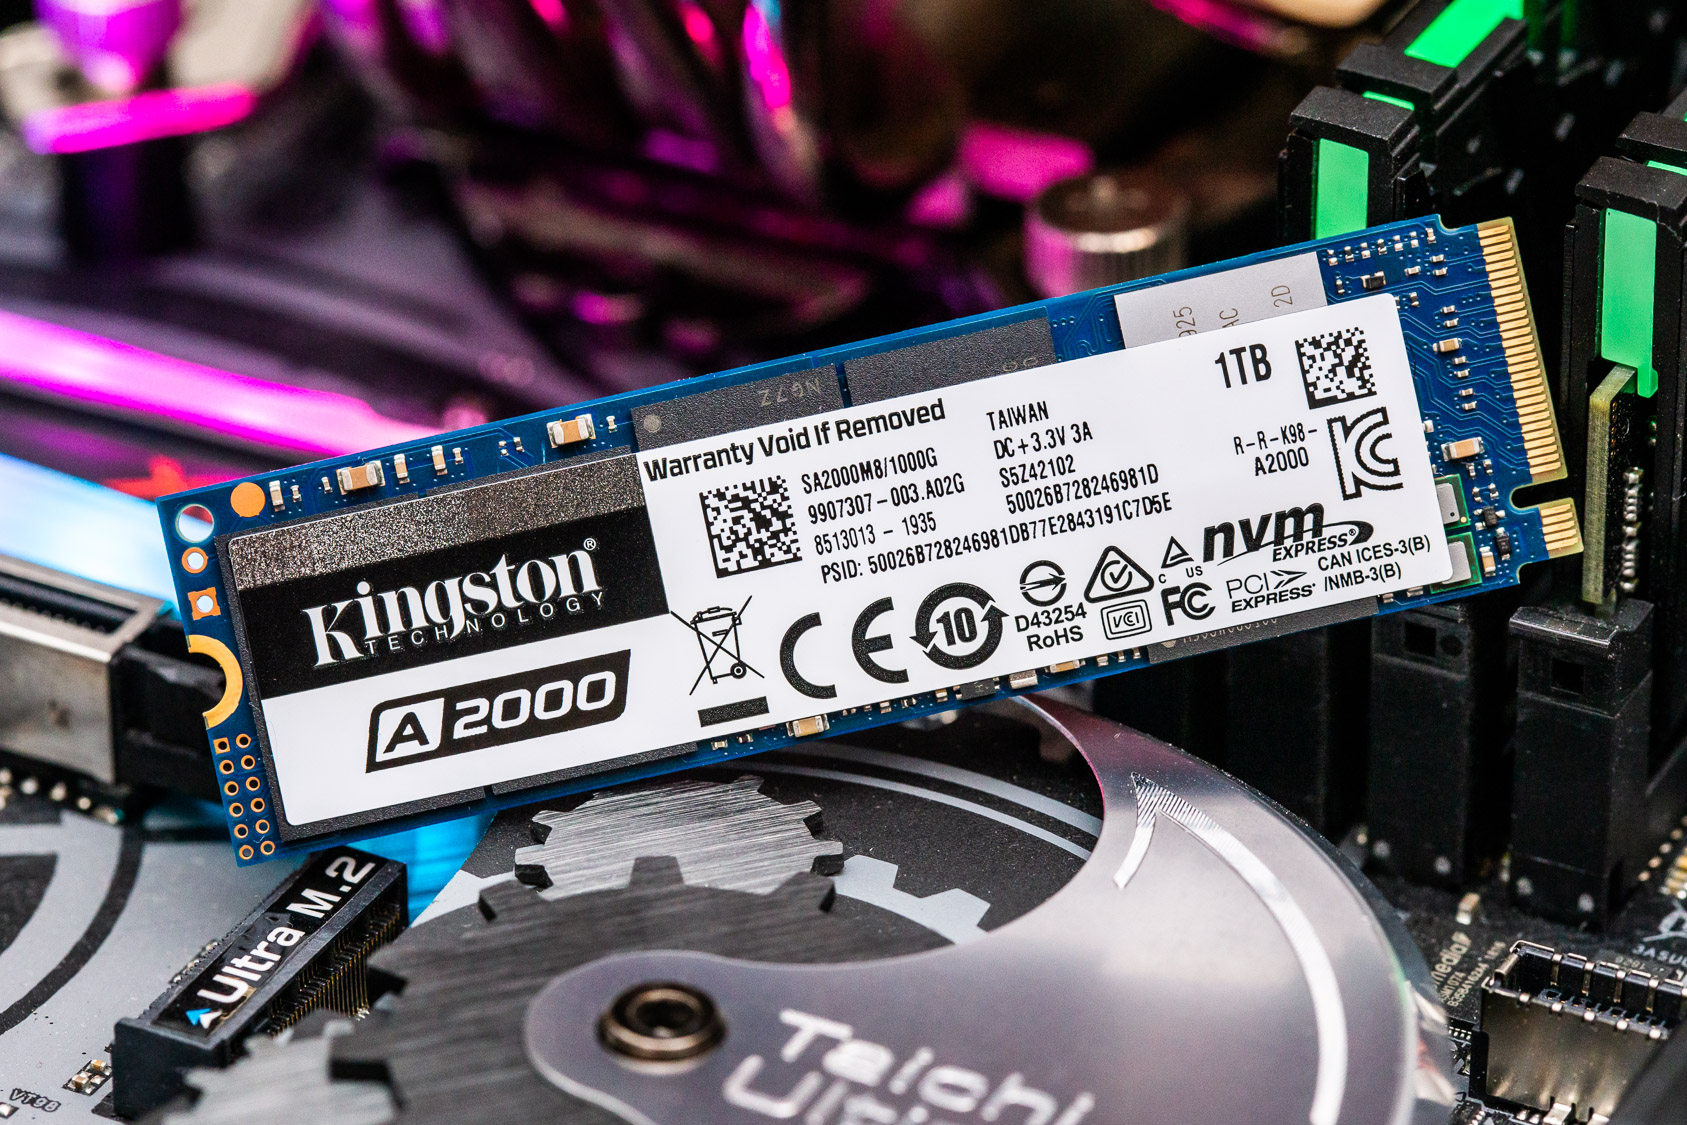 gas efficiency Flourish Kingston A2000 M.2 NVMe SSD Review: Security, Endurance, and Low Pricing |  Tom's Hardware